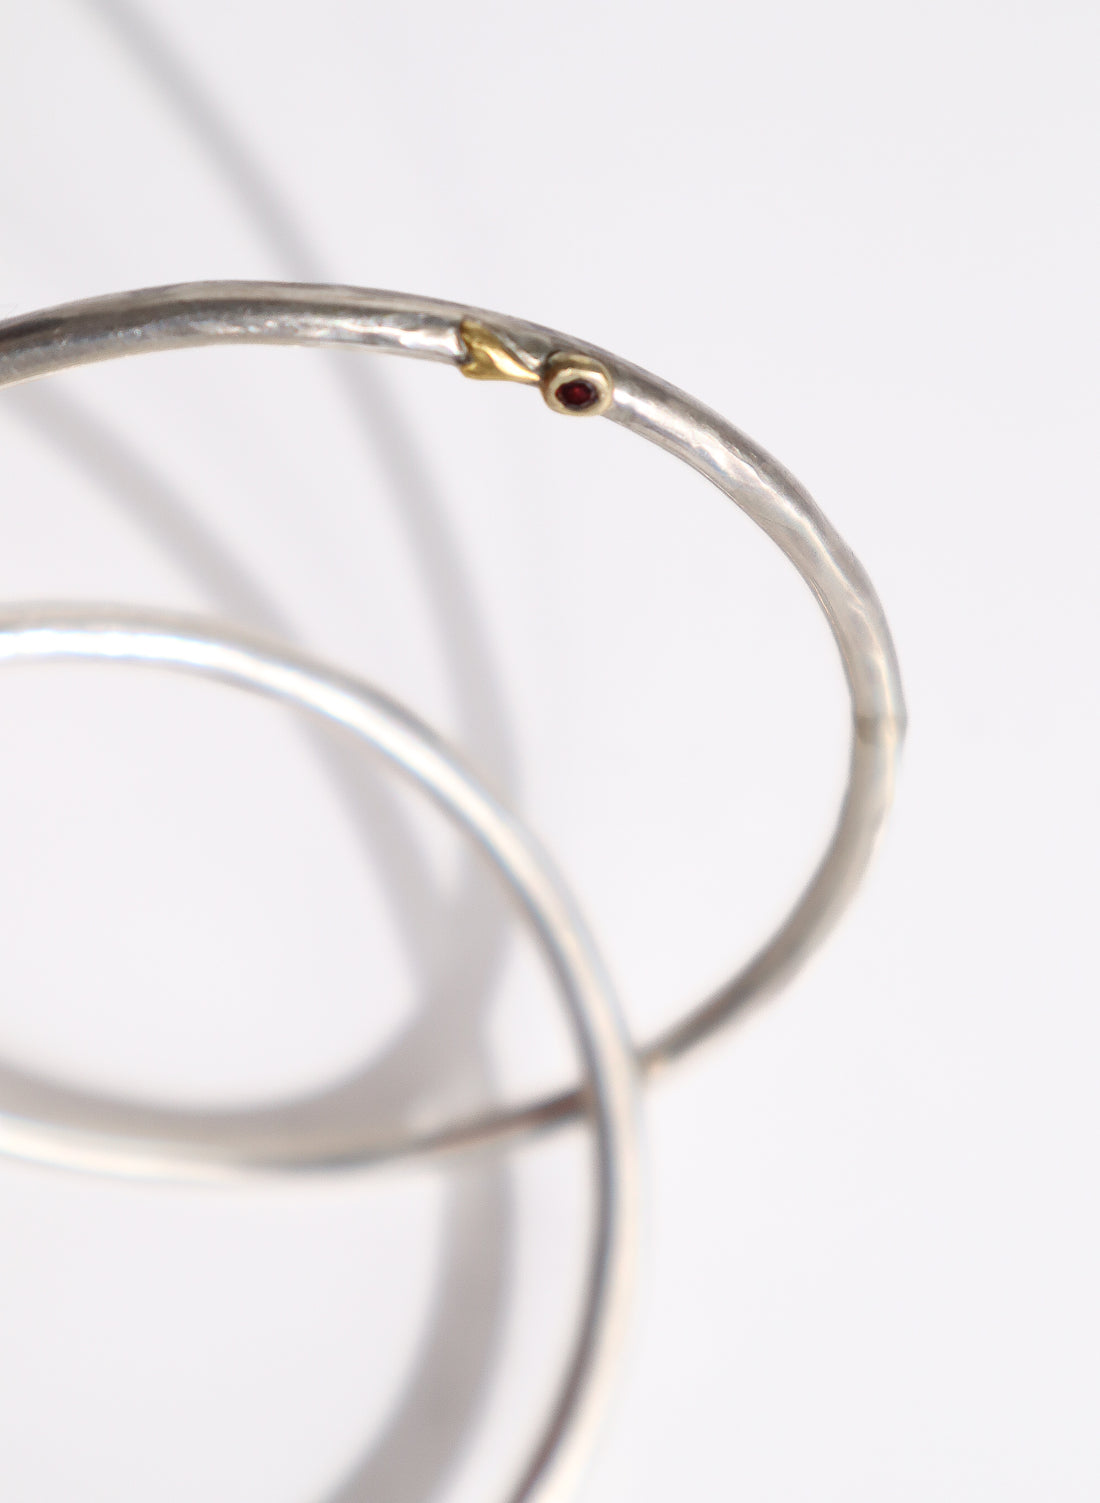 Darling Bud Bangle with Sterling Silver and 24ct African Garnet